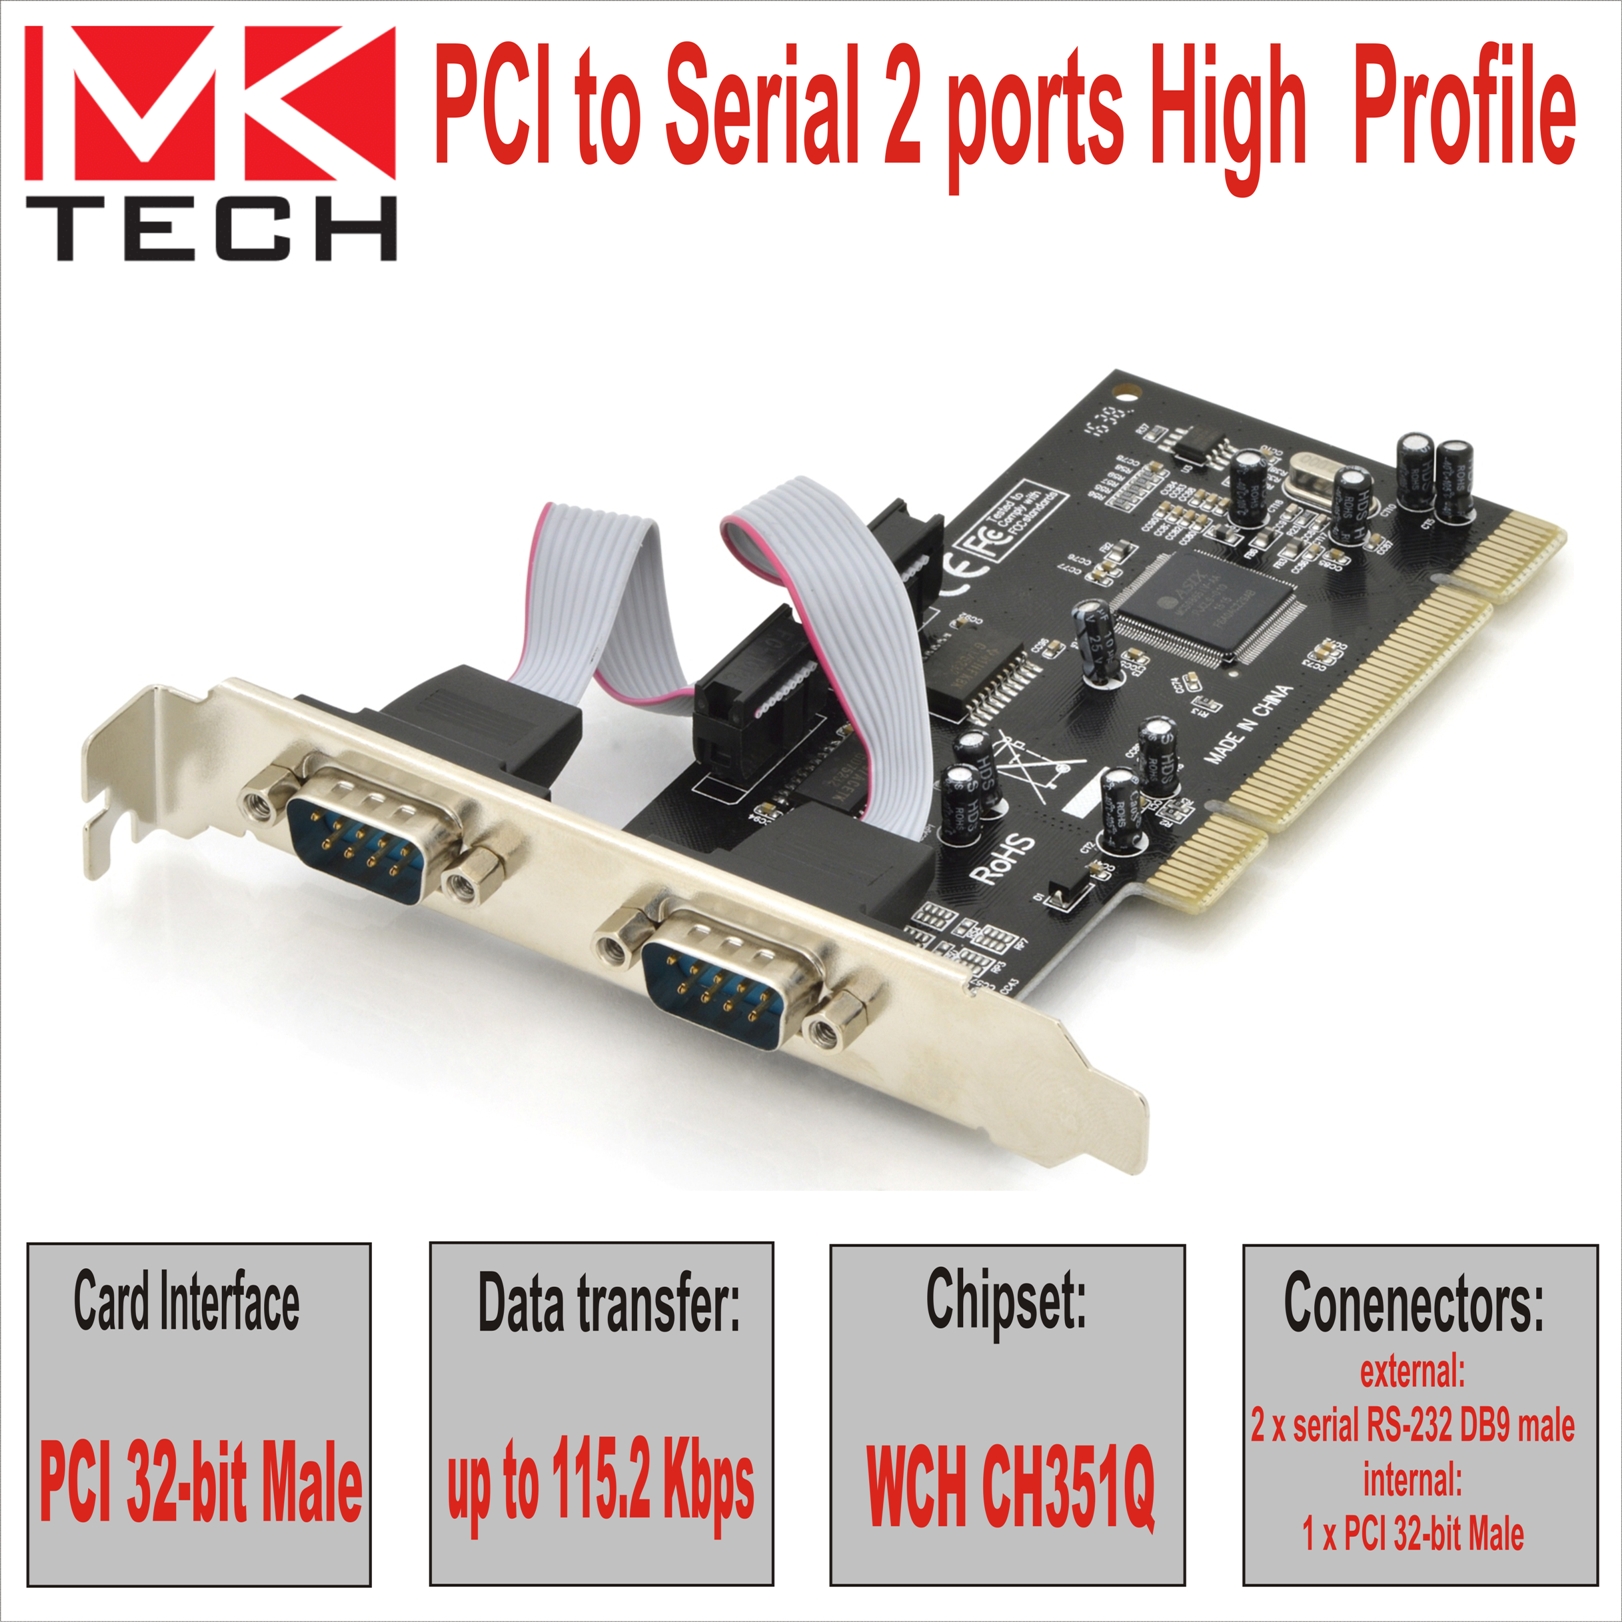 PCI to Serial 2 ports High Profile MKTECH